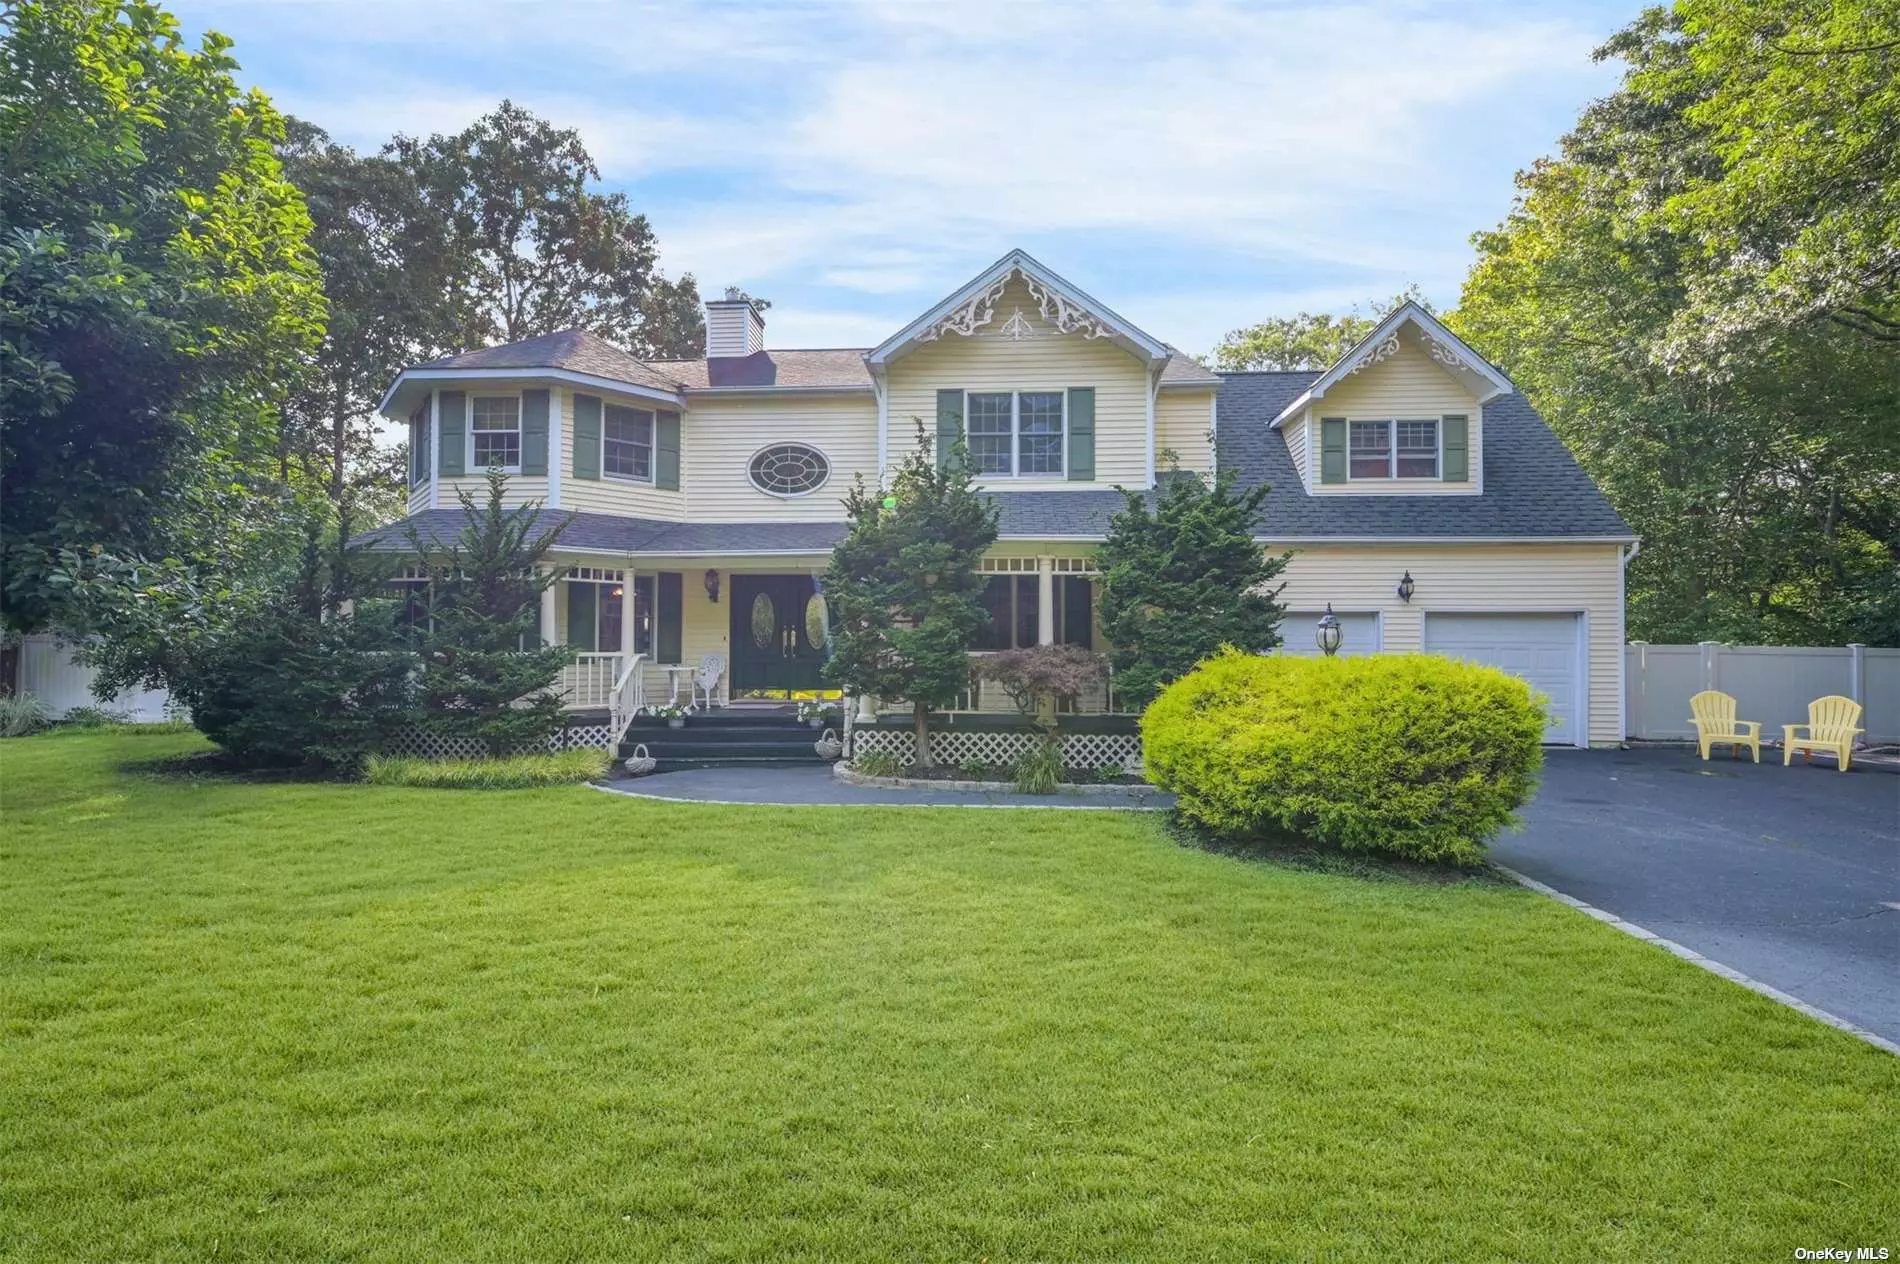 Post-Victorian Waterfront, 4 Bedrooms, Primary Bedroom has full Bath with Jaccuzzi Tub, Skylight & Private Balcony, Central Air Conditioning, Central VAC, Hardwood Floors, Sky Lights, 1.04 Acres, (Heated) Gunite Pool, Gazebo, Surround Sound Bose System, Located in Wilcox Farms.